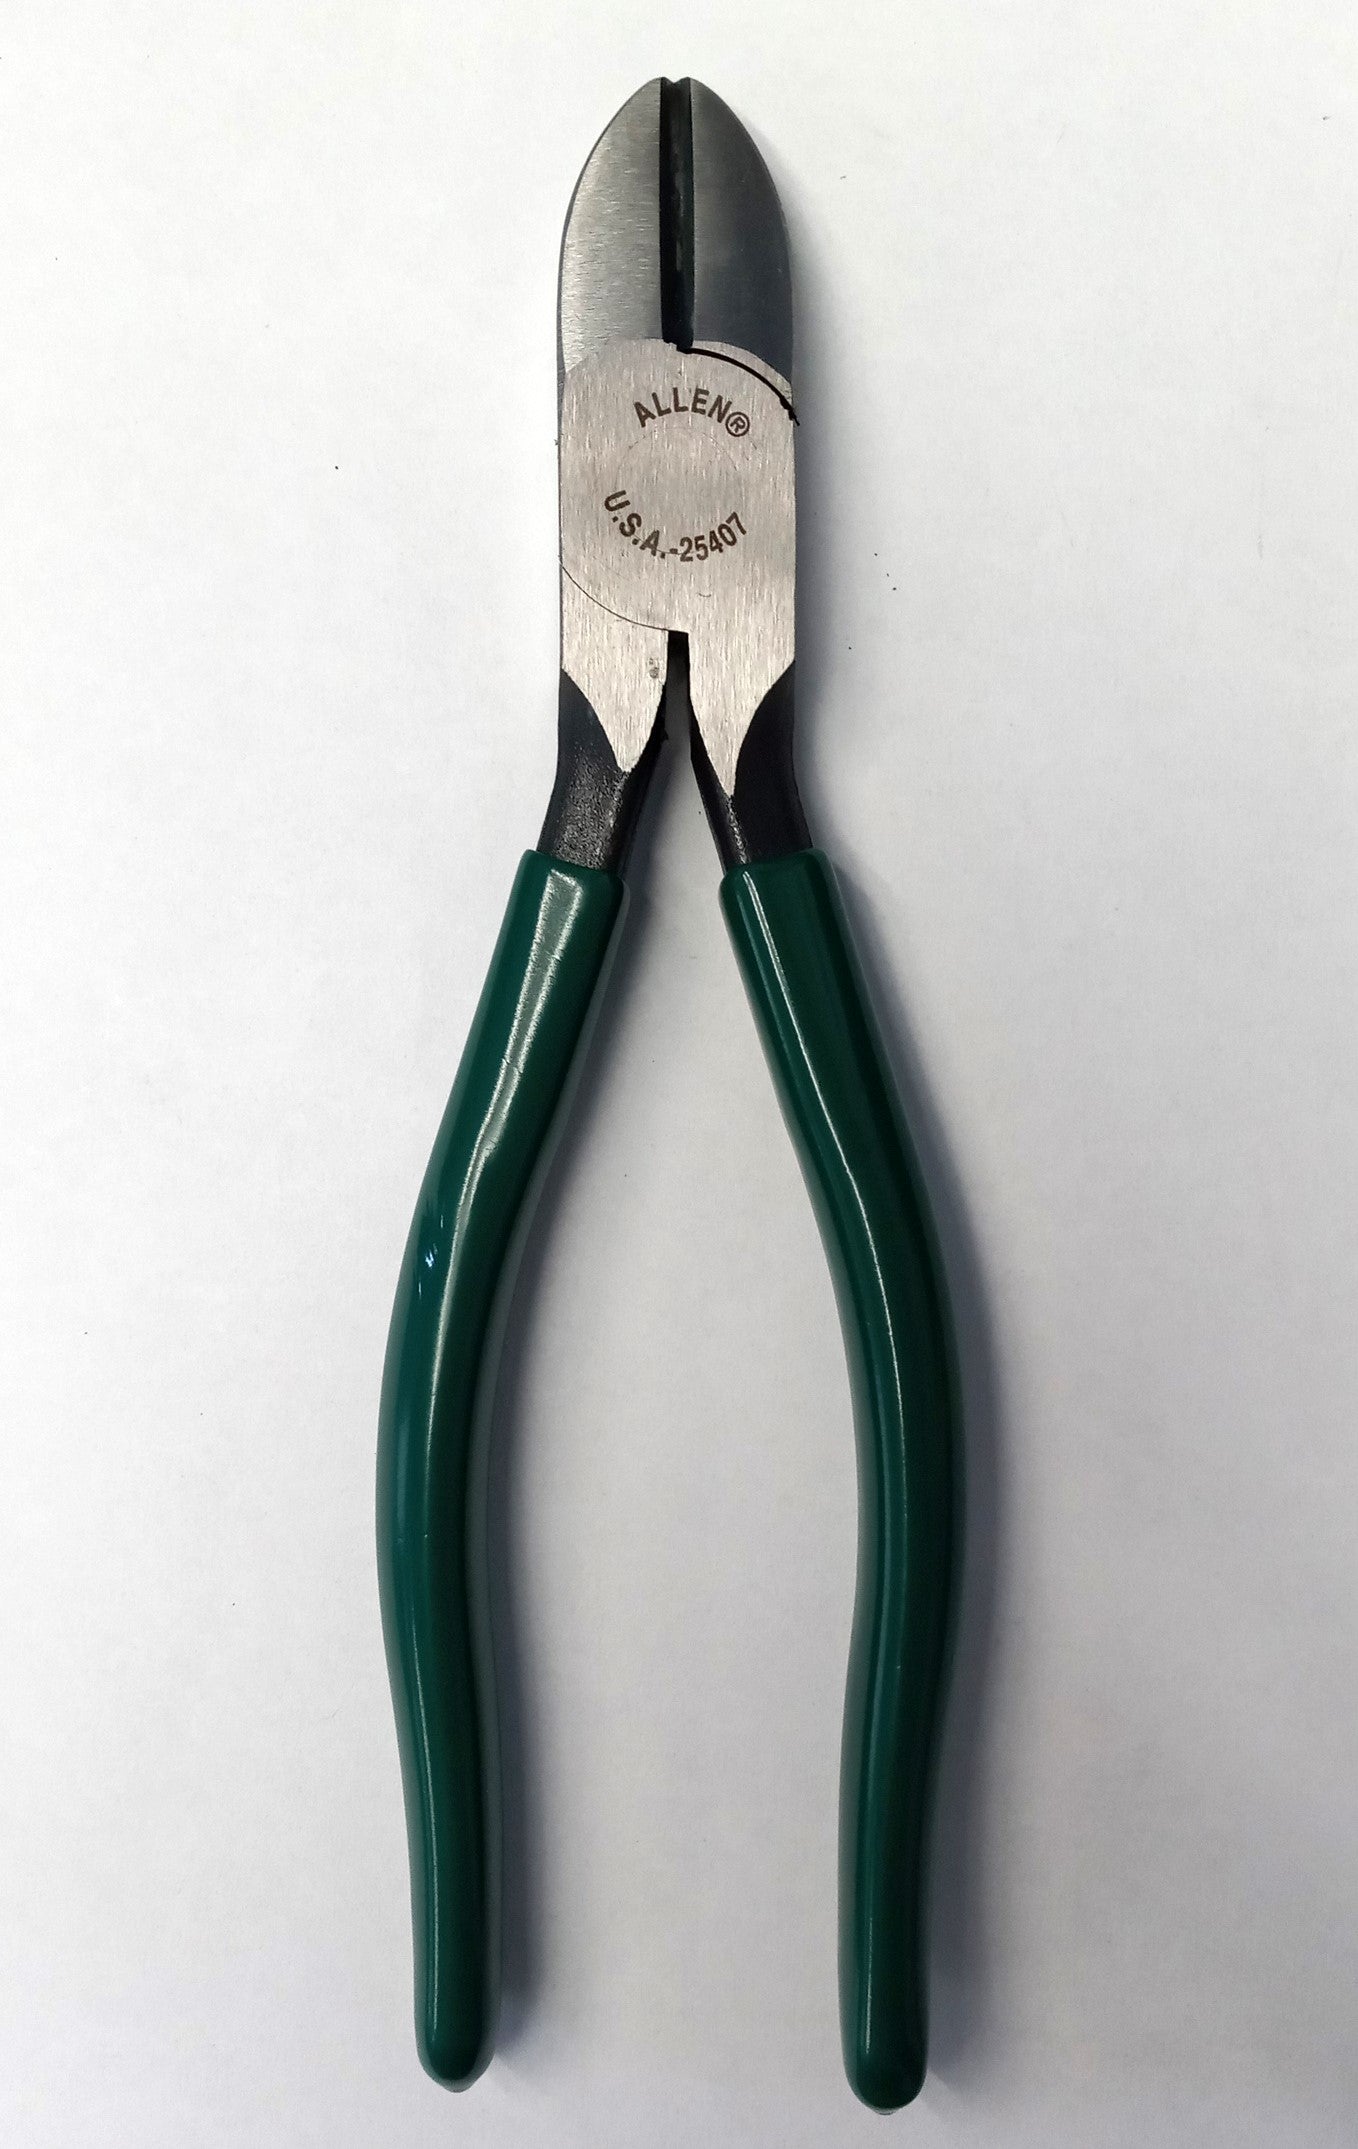 Allen 25407 7" Diagonal Cutting Pliers with Grip USA